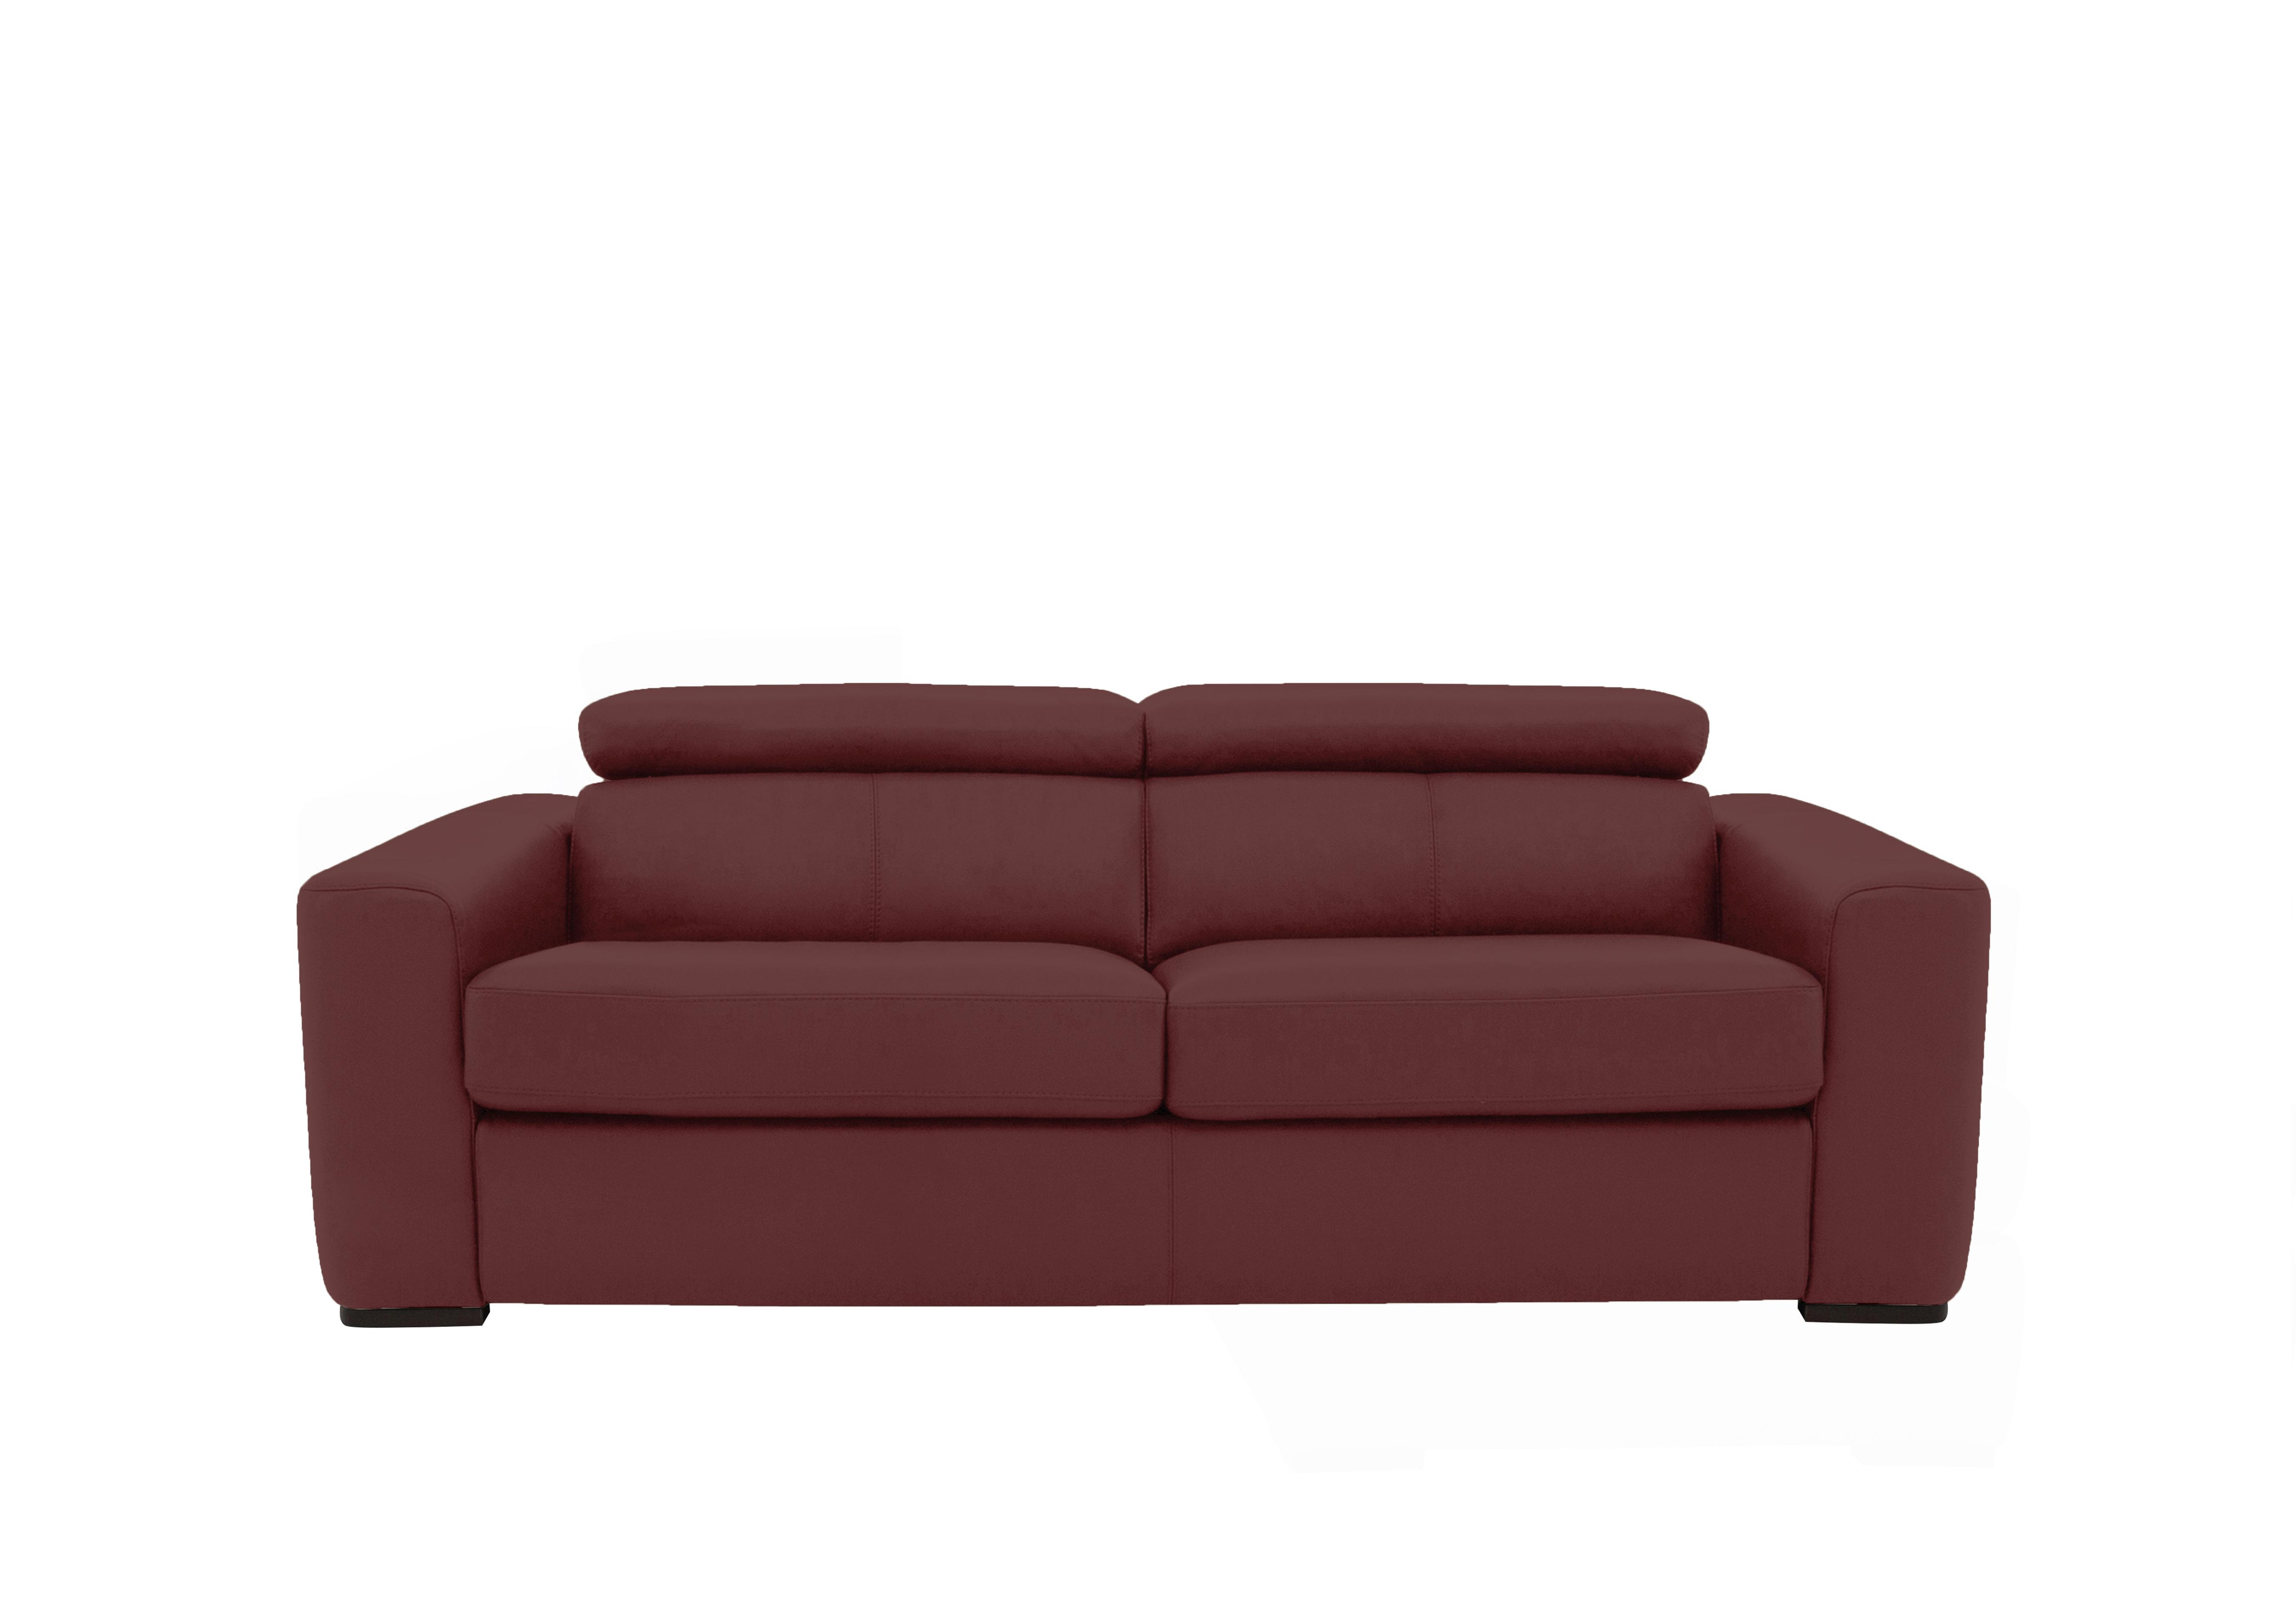 Infinity 3 Seater Leather Sofa in Bv-035c Deep Red on Furniture Village